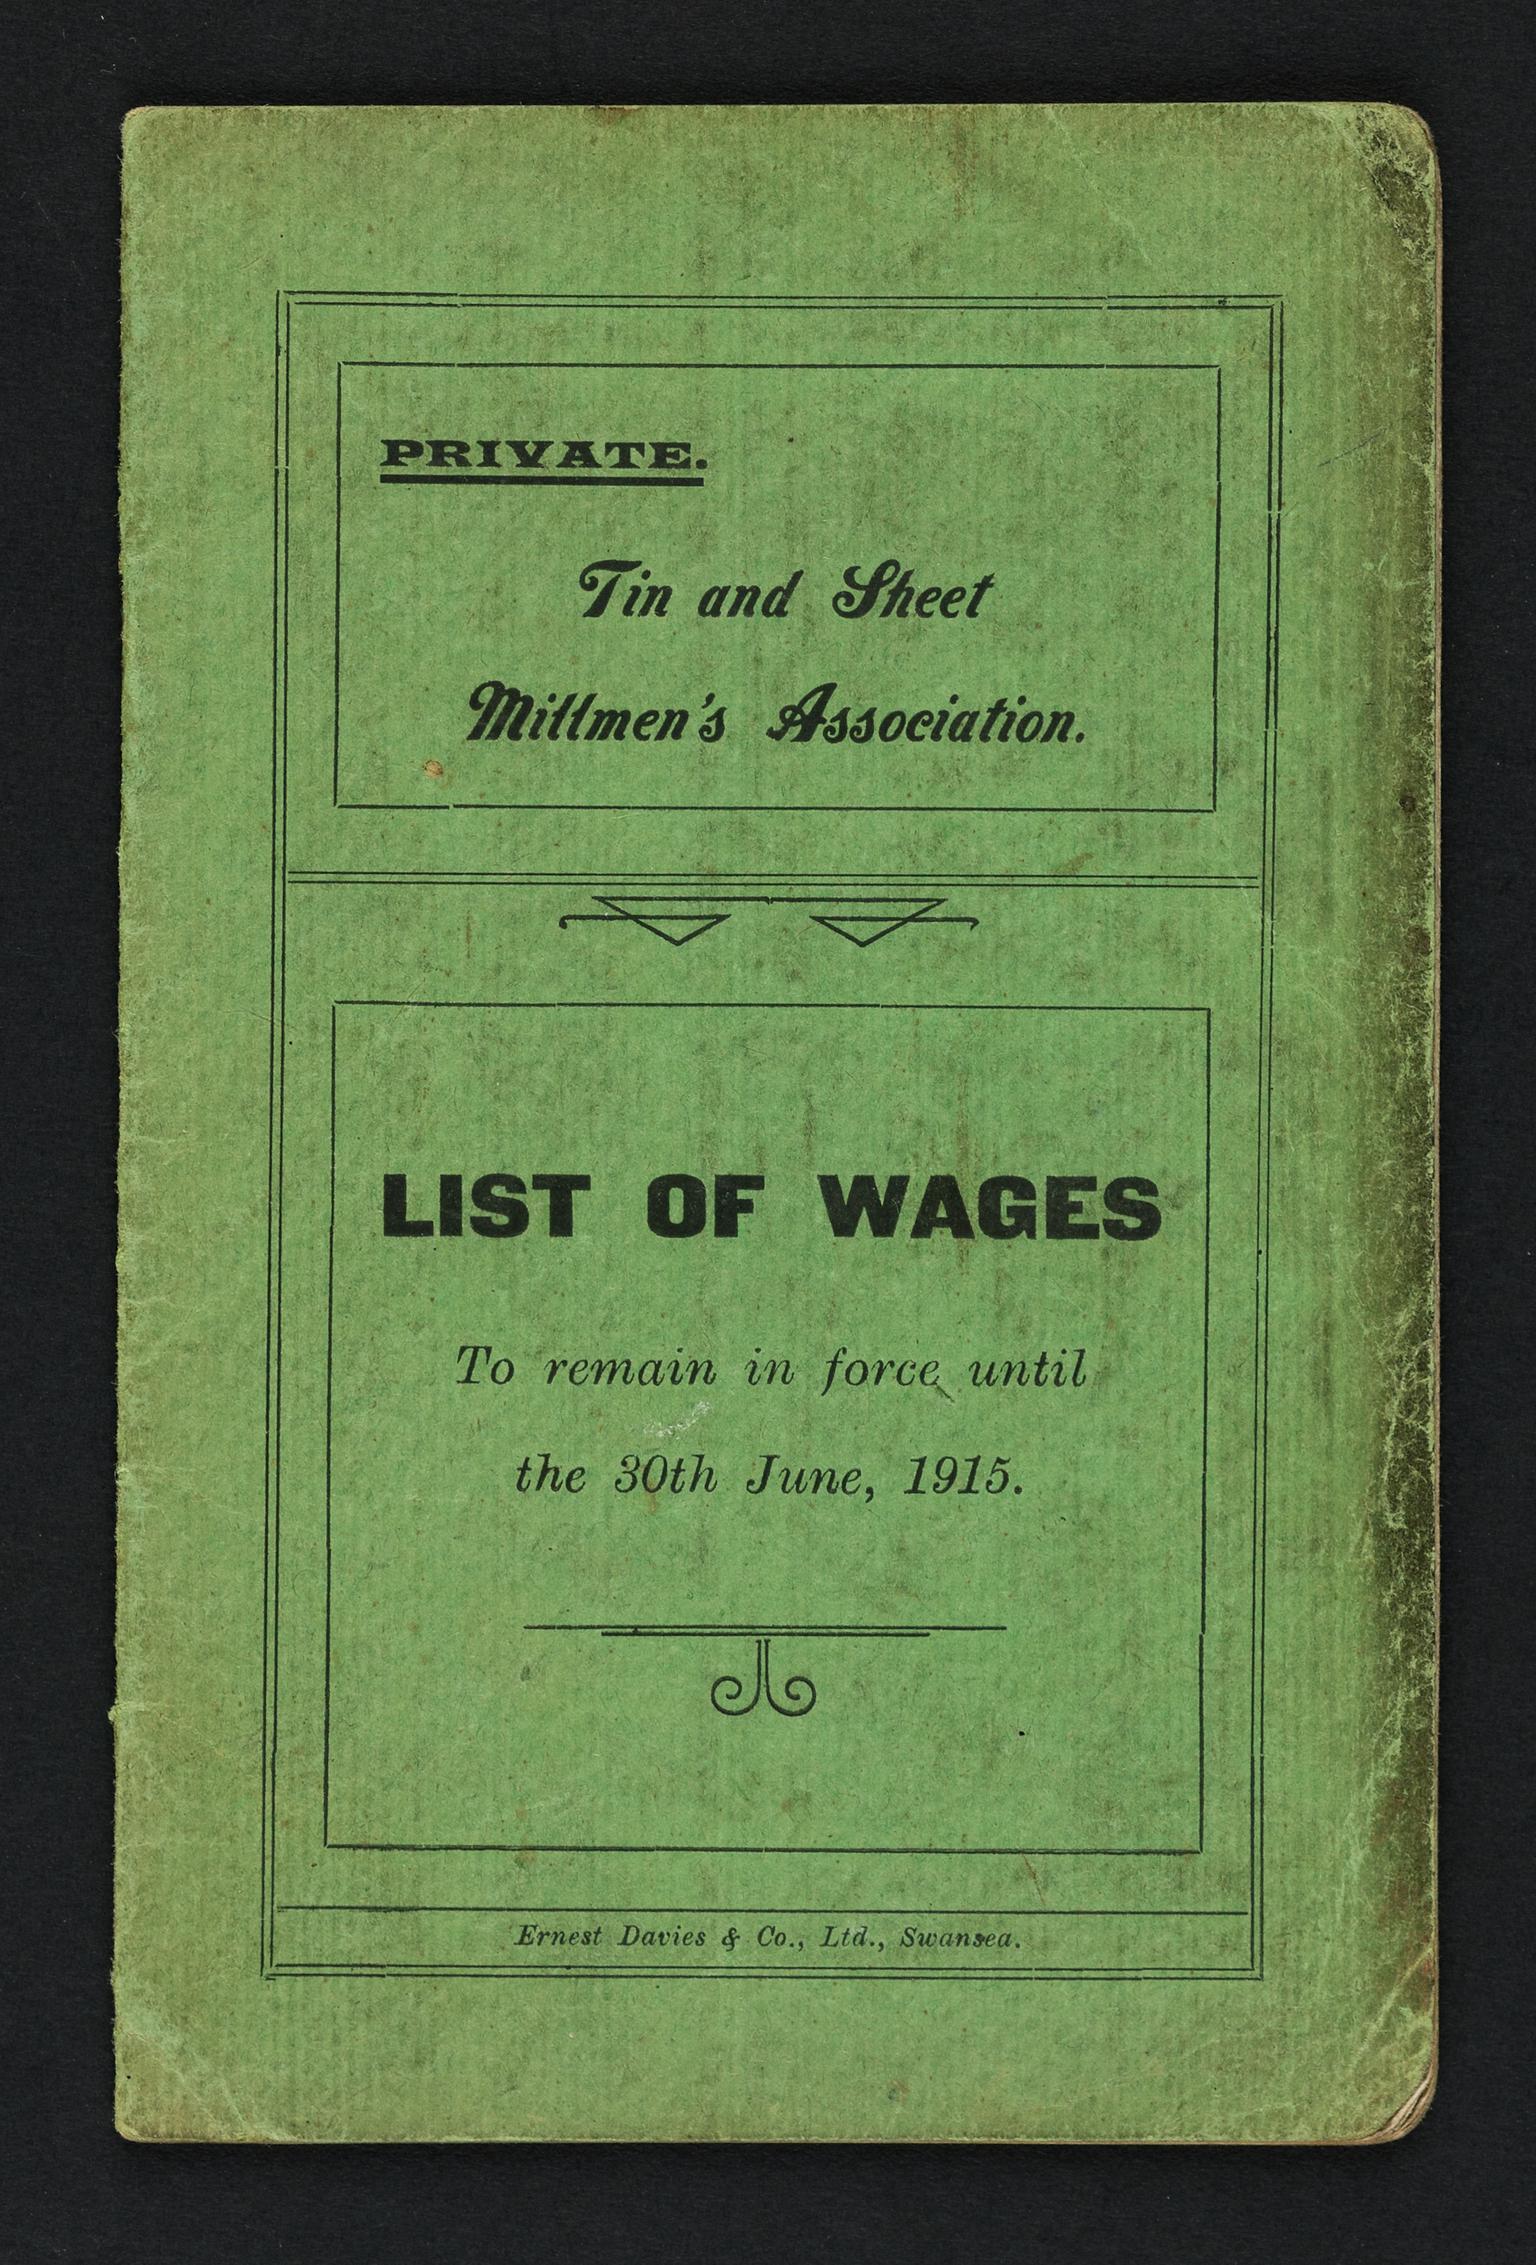 Tin and Sheet Millmen's Association. List of Wages (booklet)